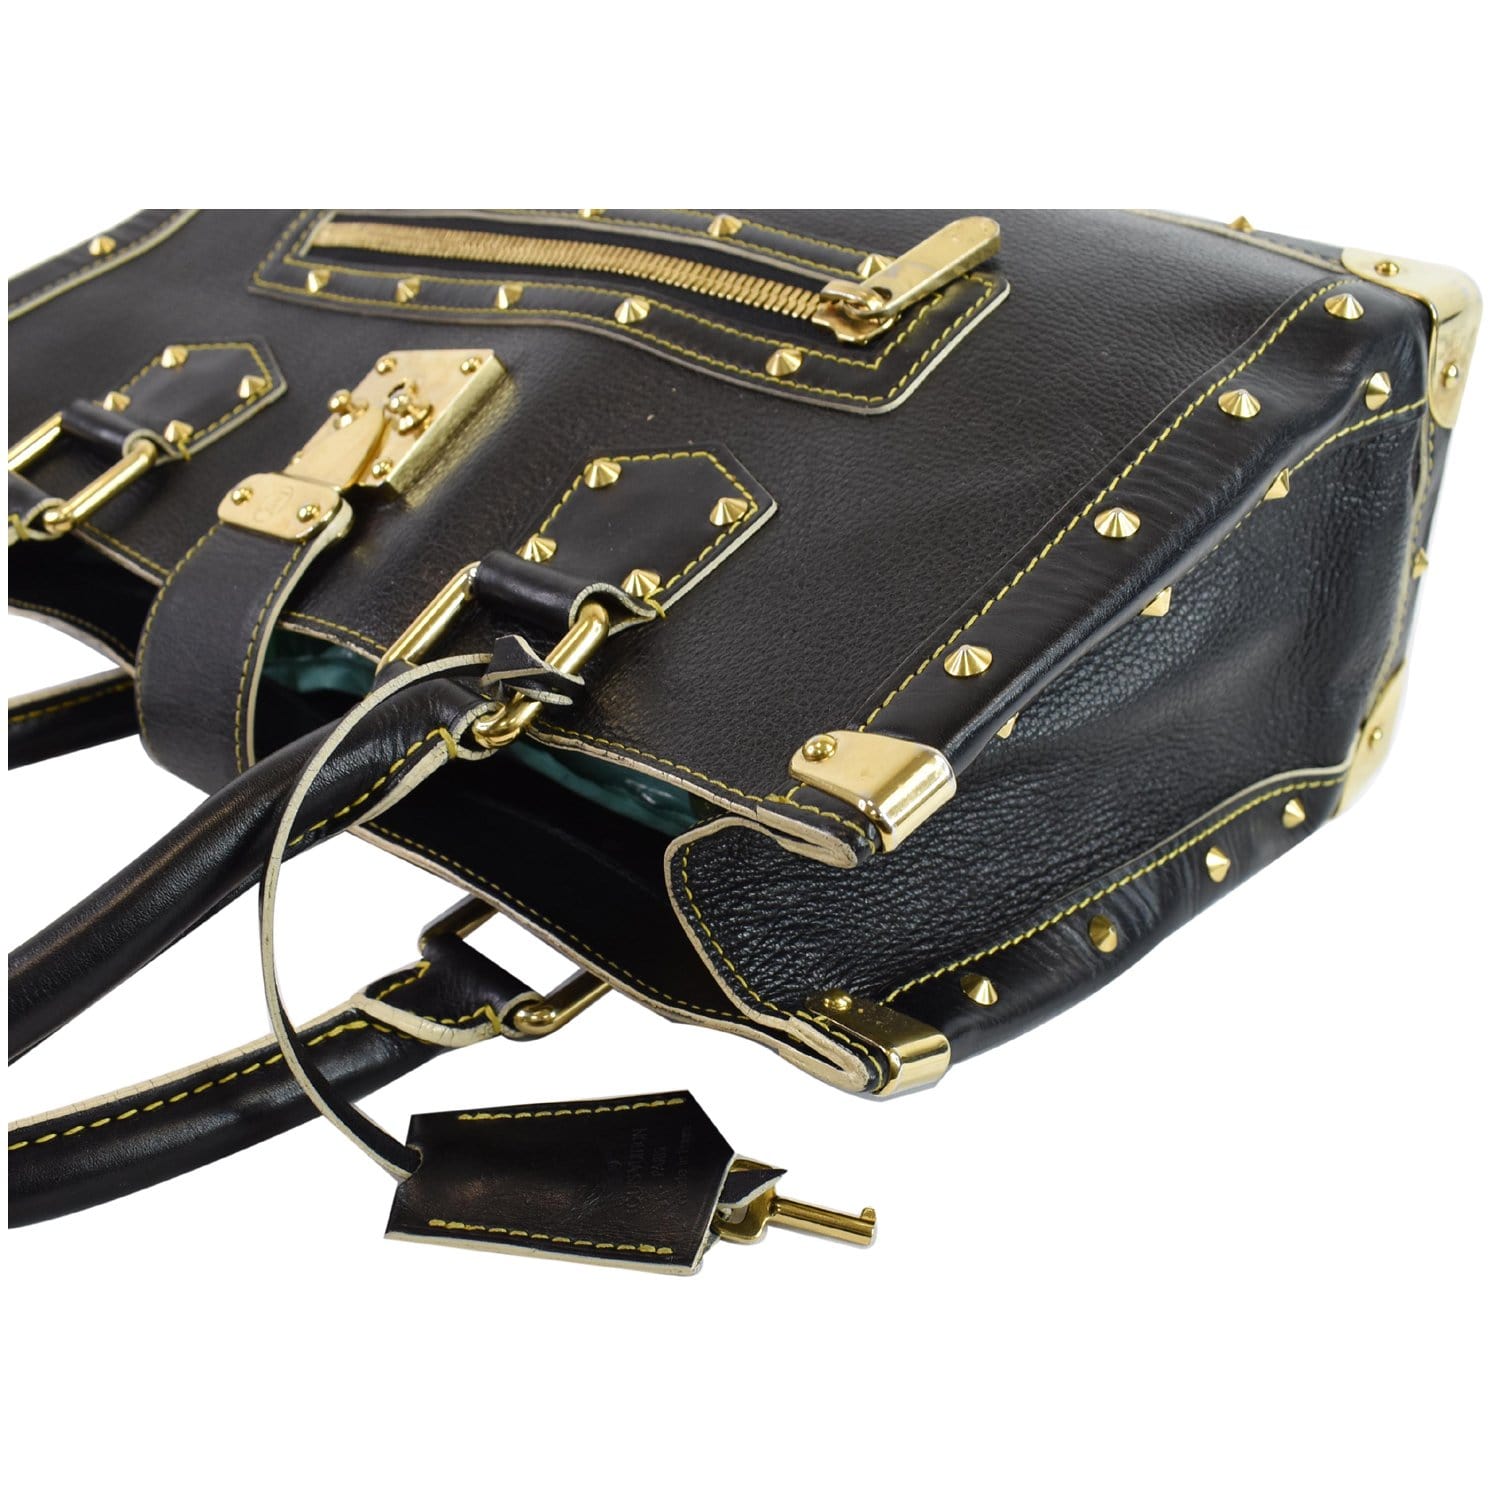 Louis Vuitton Black Suhali Leather Le Fabuleux at Jill's Consignment